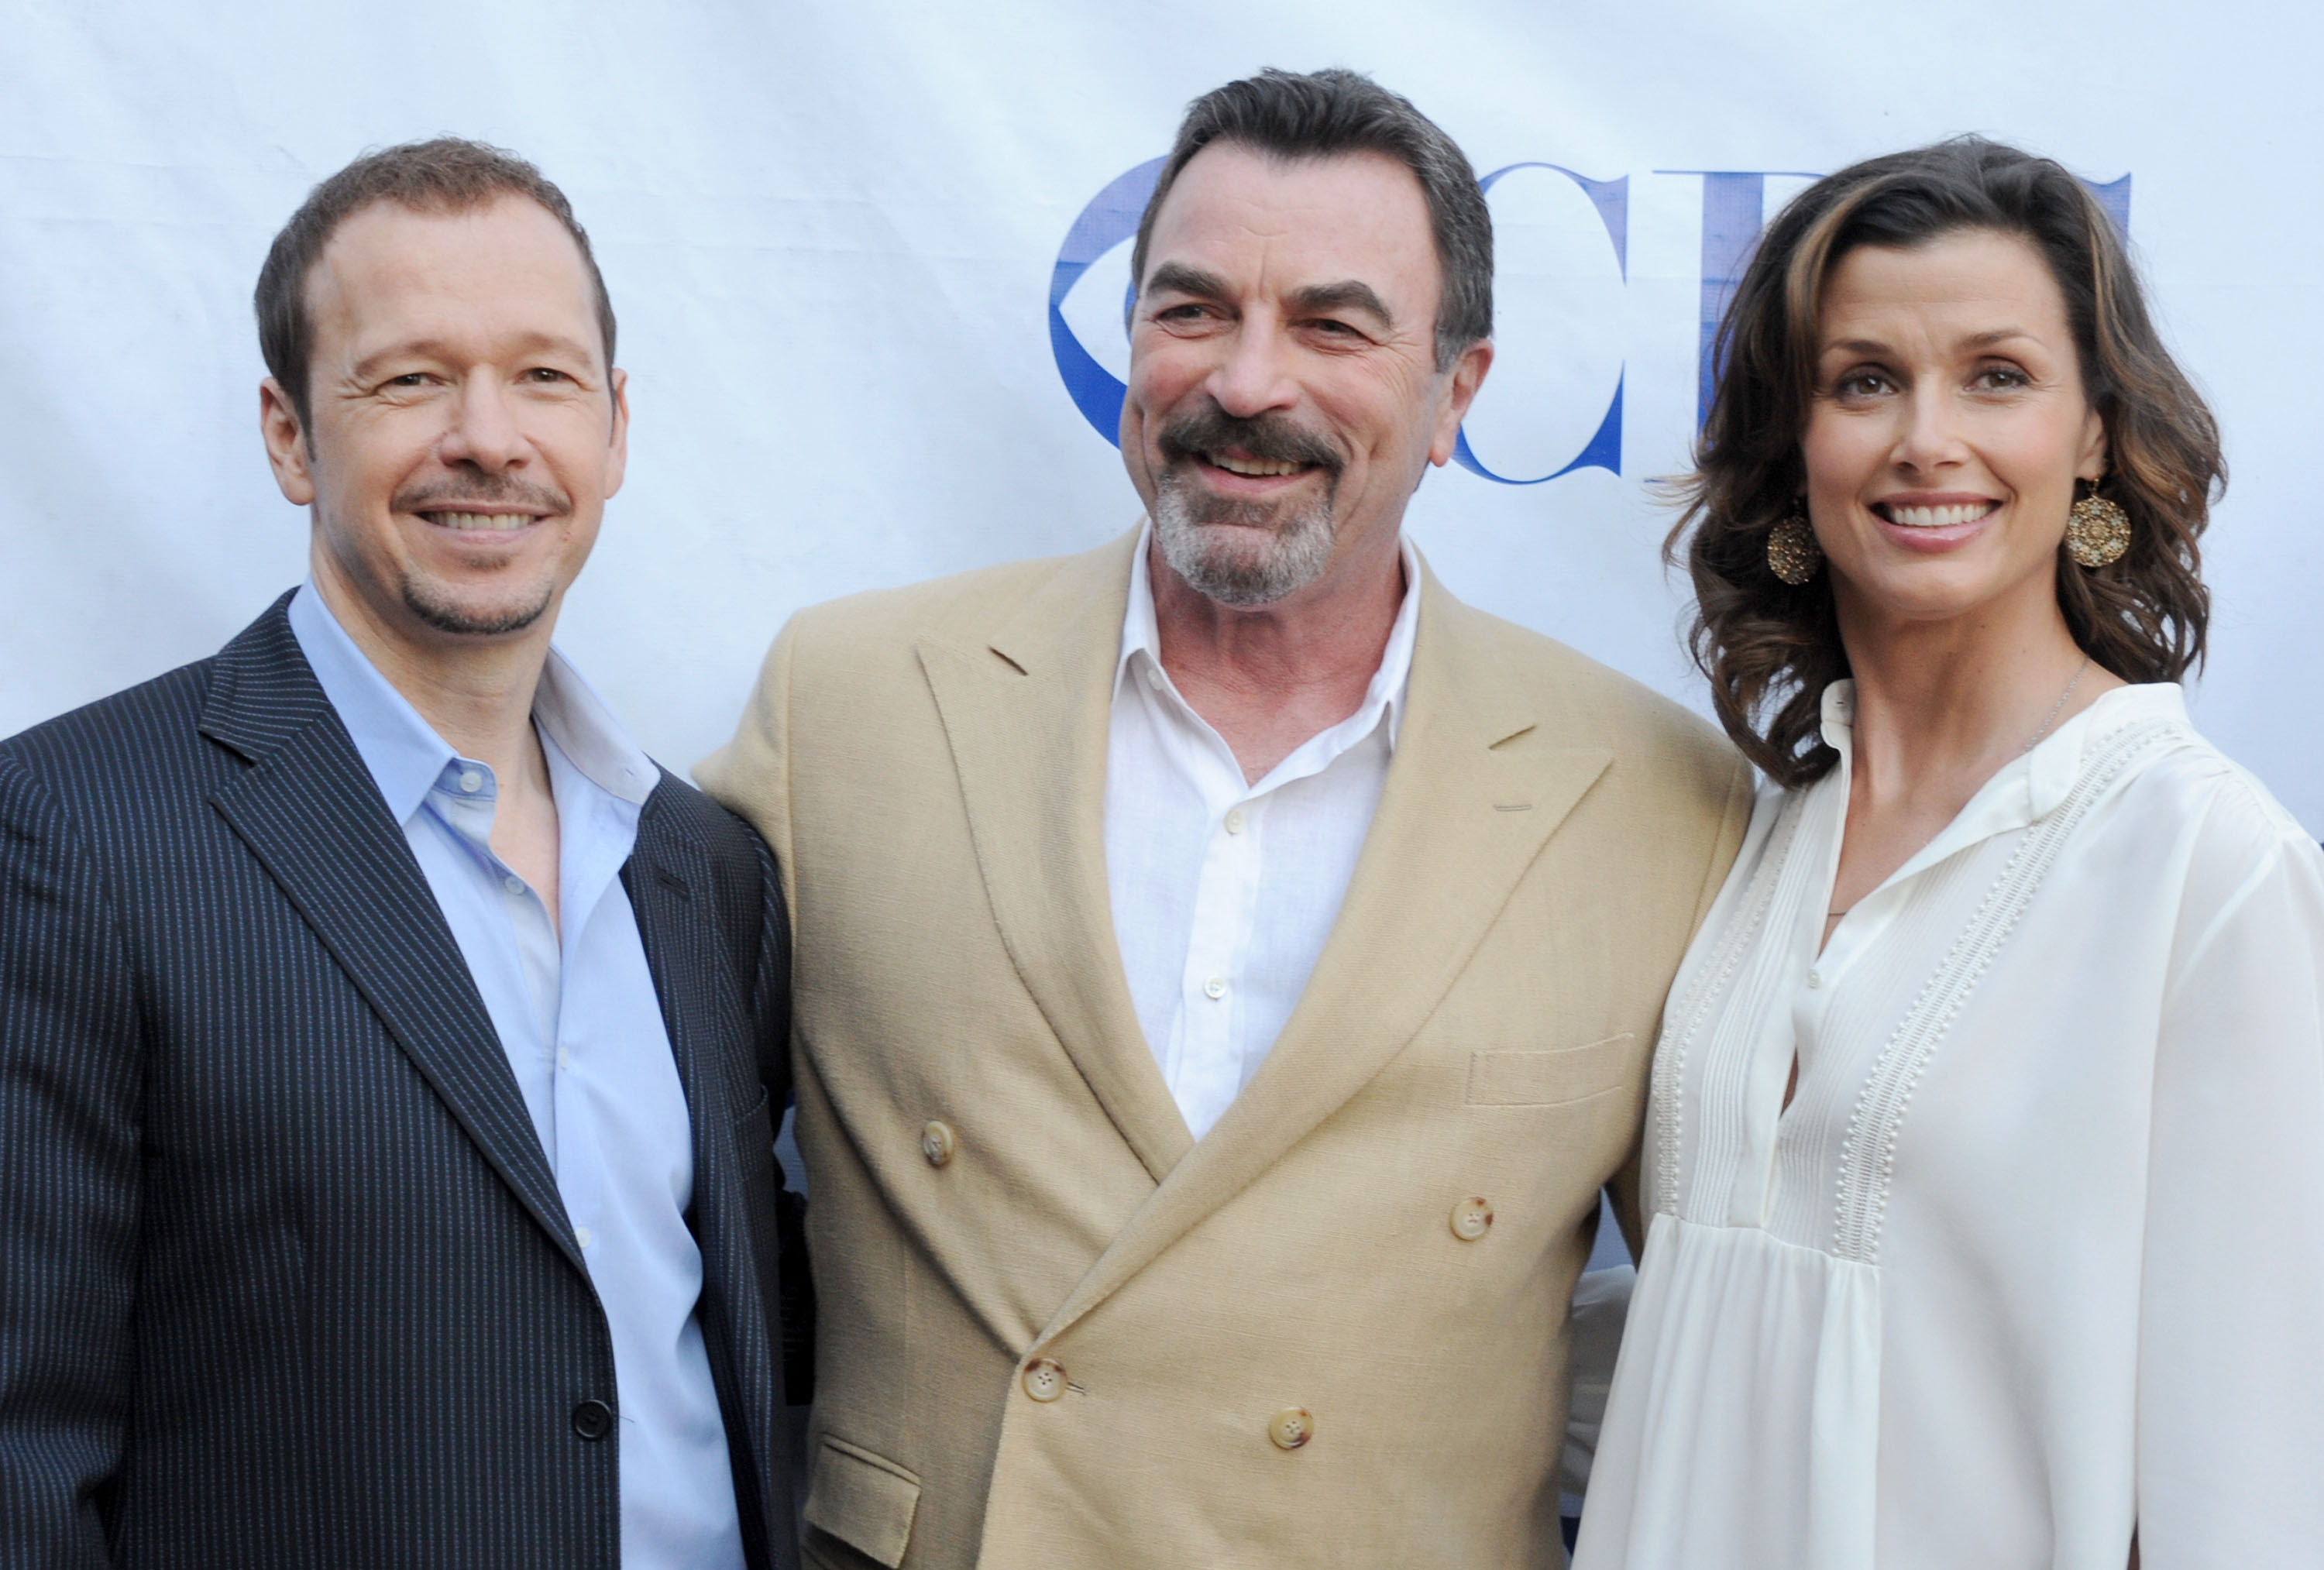 Donnie Wahlberg, Tom Selleck, and Bridget Moynahan in North Hollywood, California on June 5, 2012 | Source: Getty Images